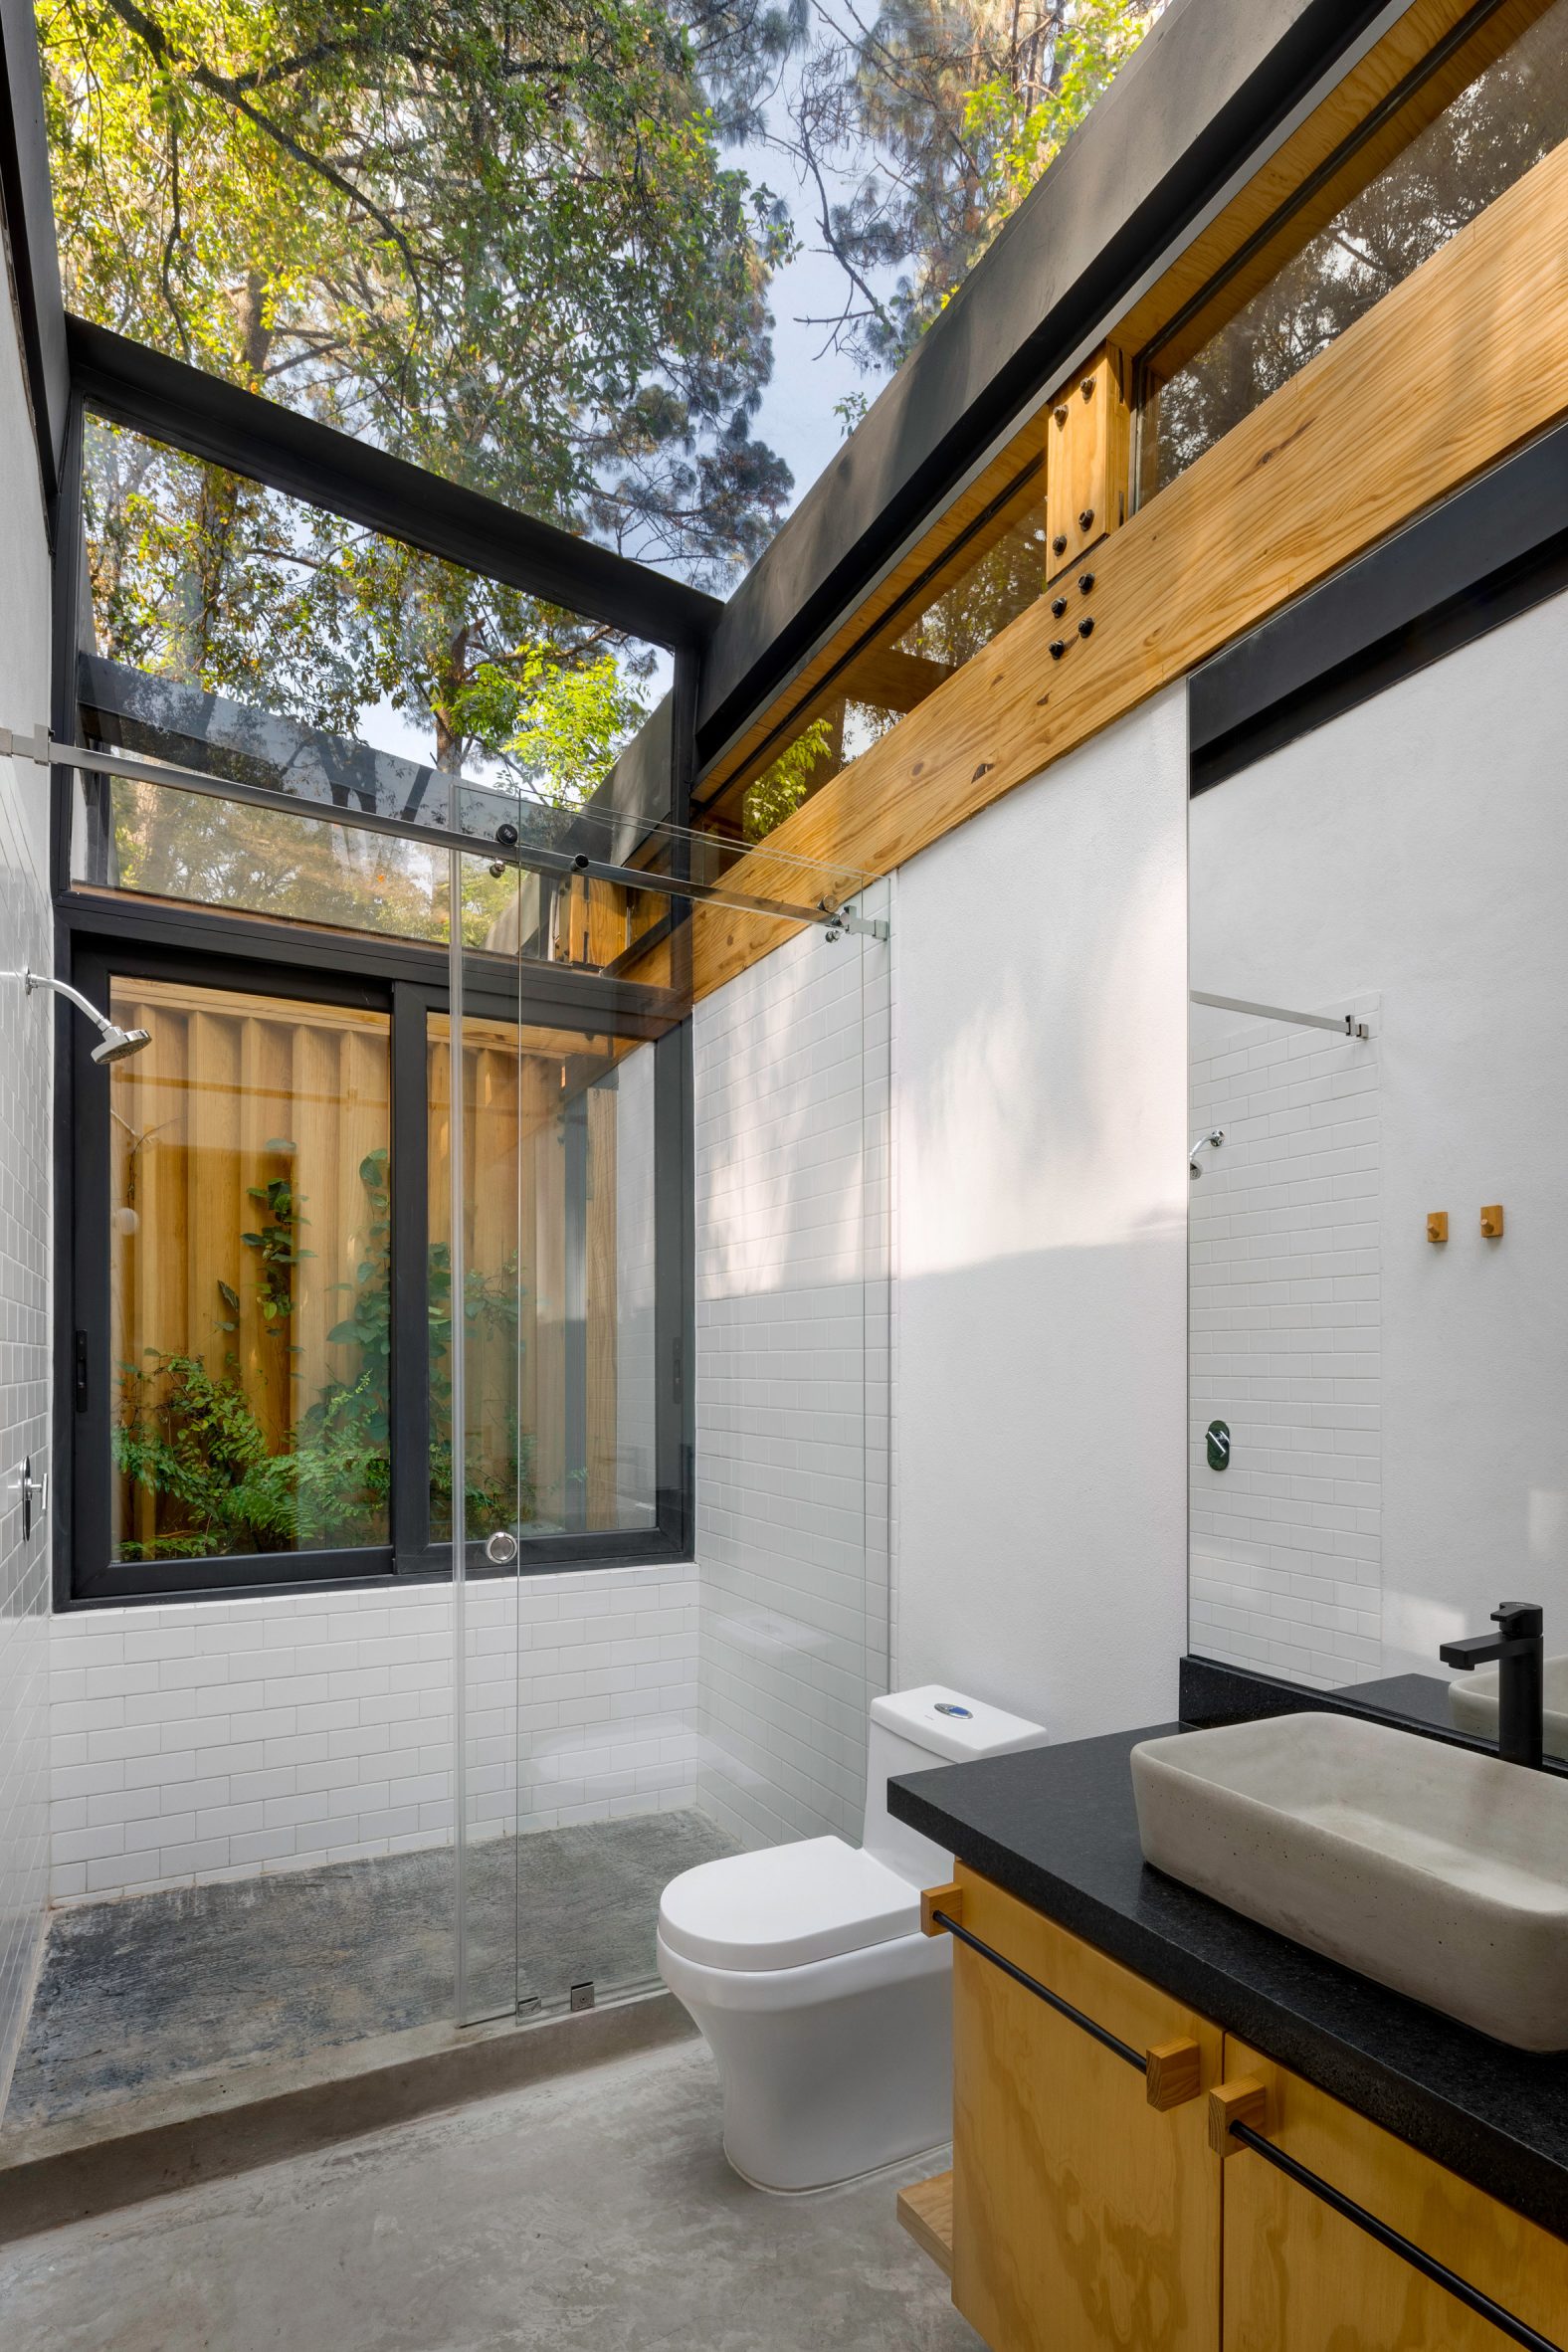 Bathroom with middle and wood accents and skylights